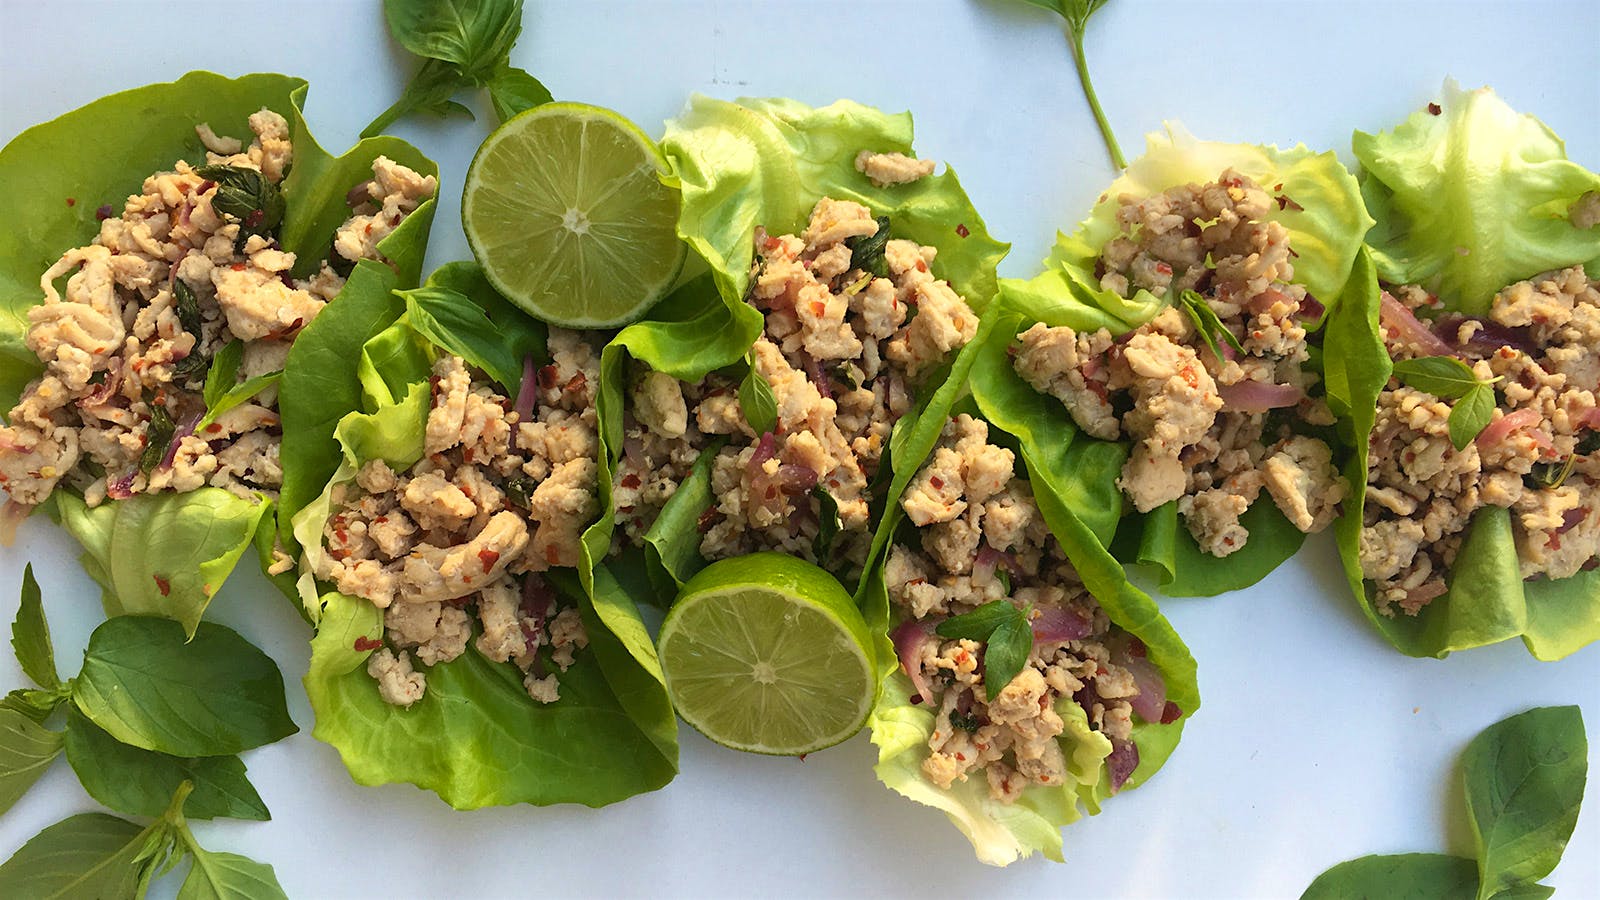 8 & $20: Flavorful Thai Lettuce Wraps With a Crisp White